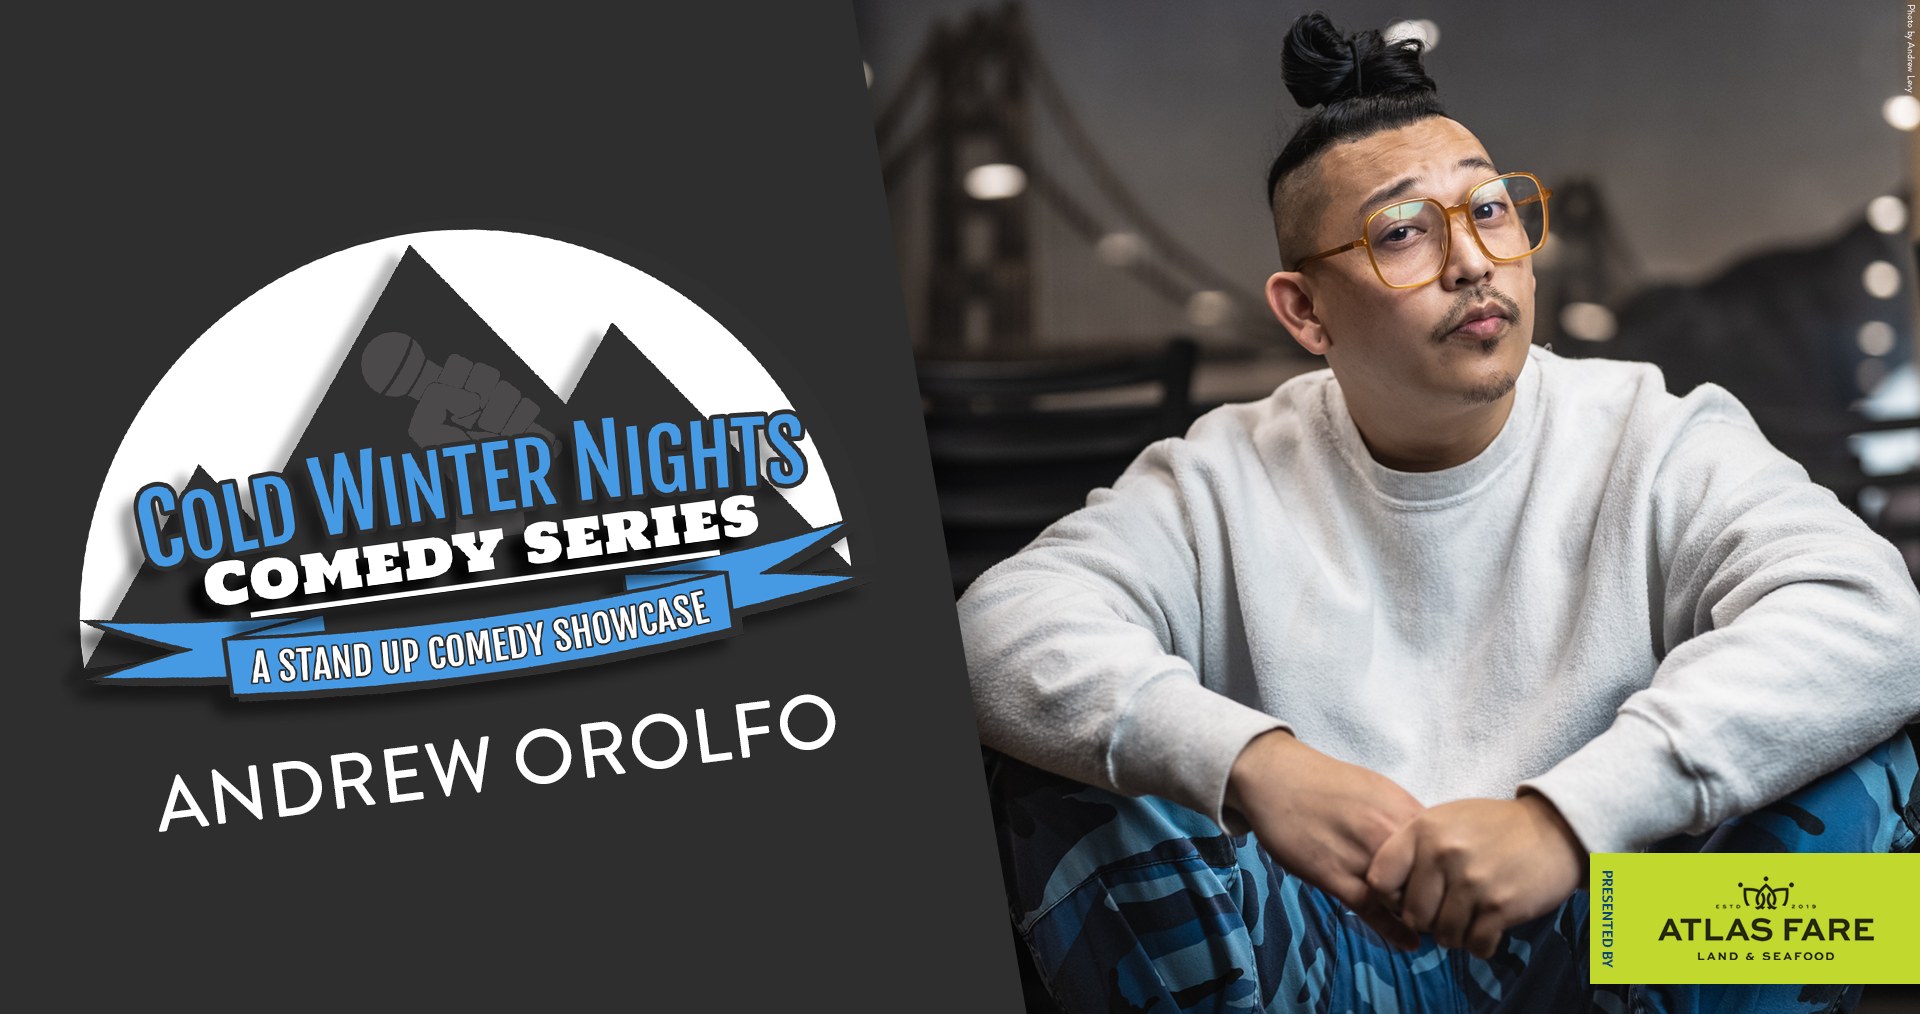 <h1 class="tribe-events-single-event-title">Cold Winter Nights Comedy Series: Andrew Orolfo</h1>